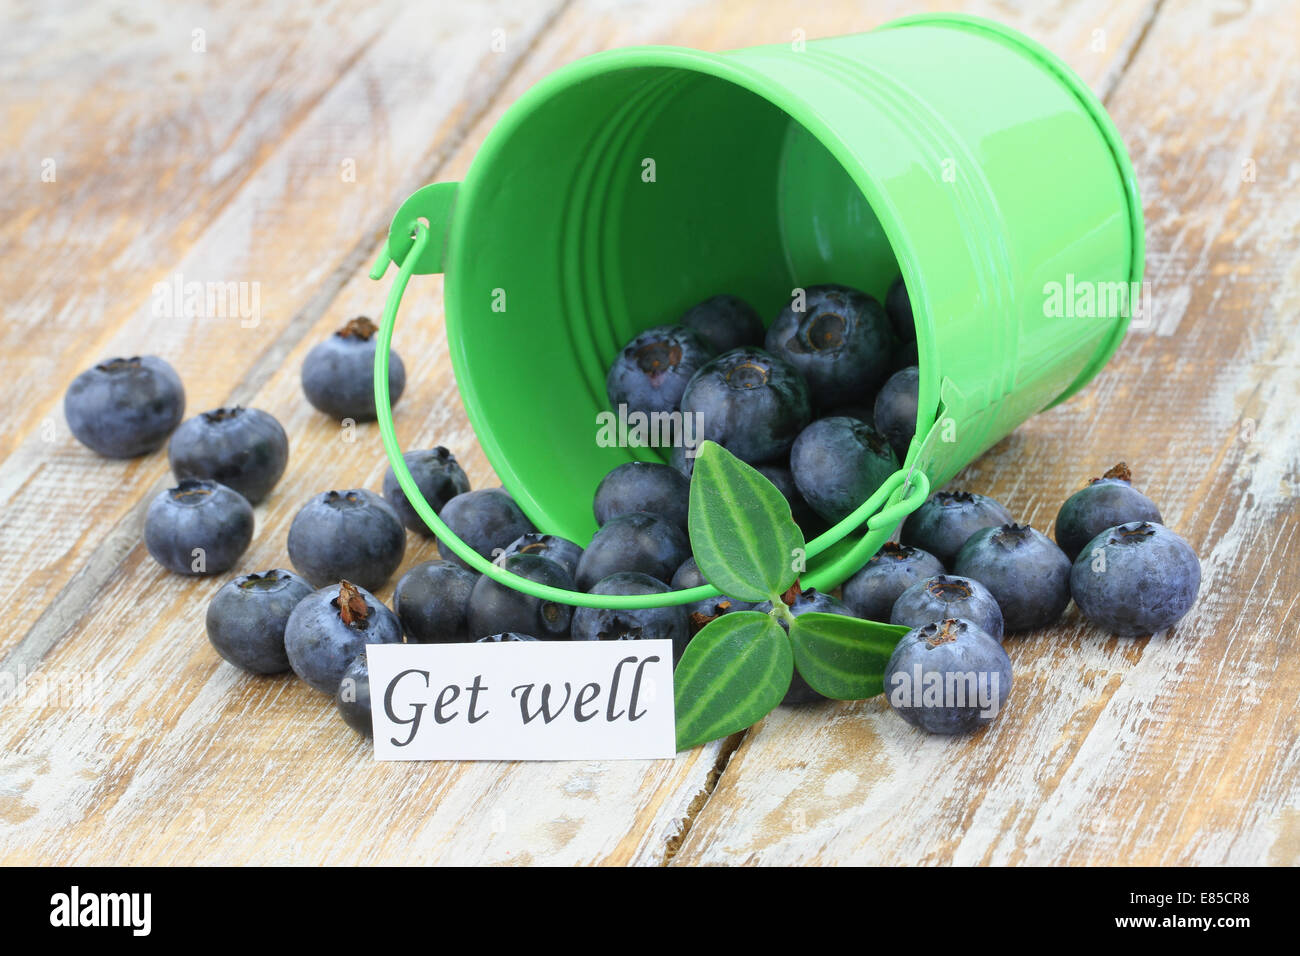 Get well card with blueberries scattered on wooden surface Stock Photo